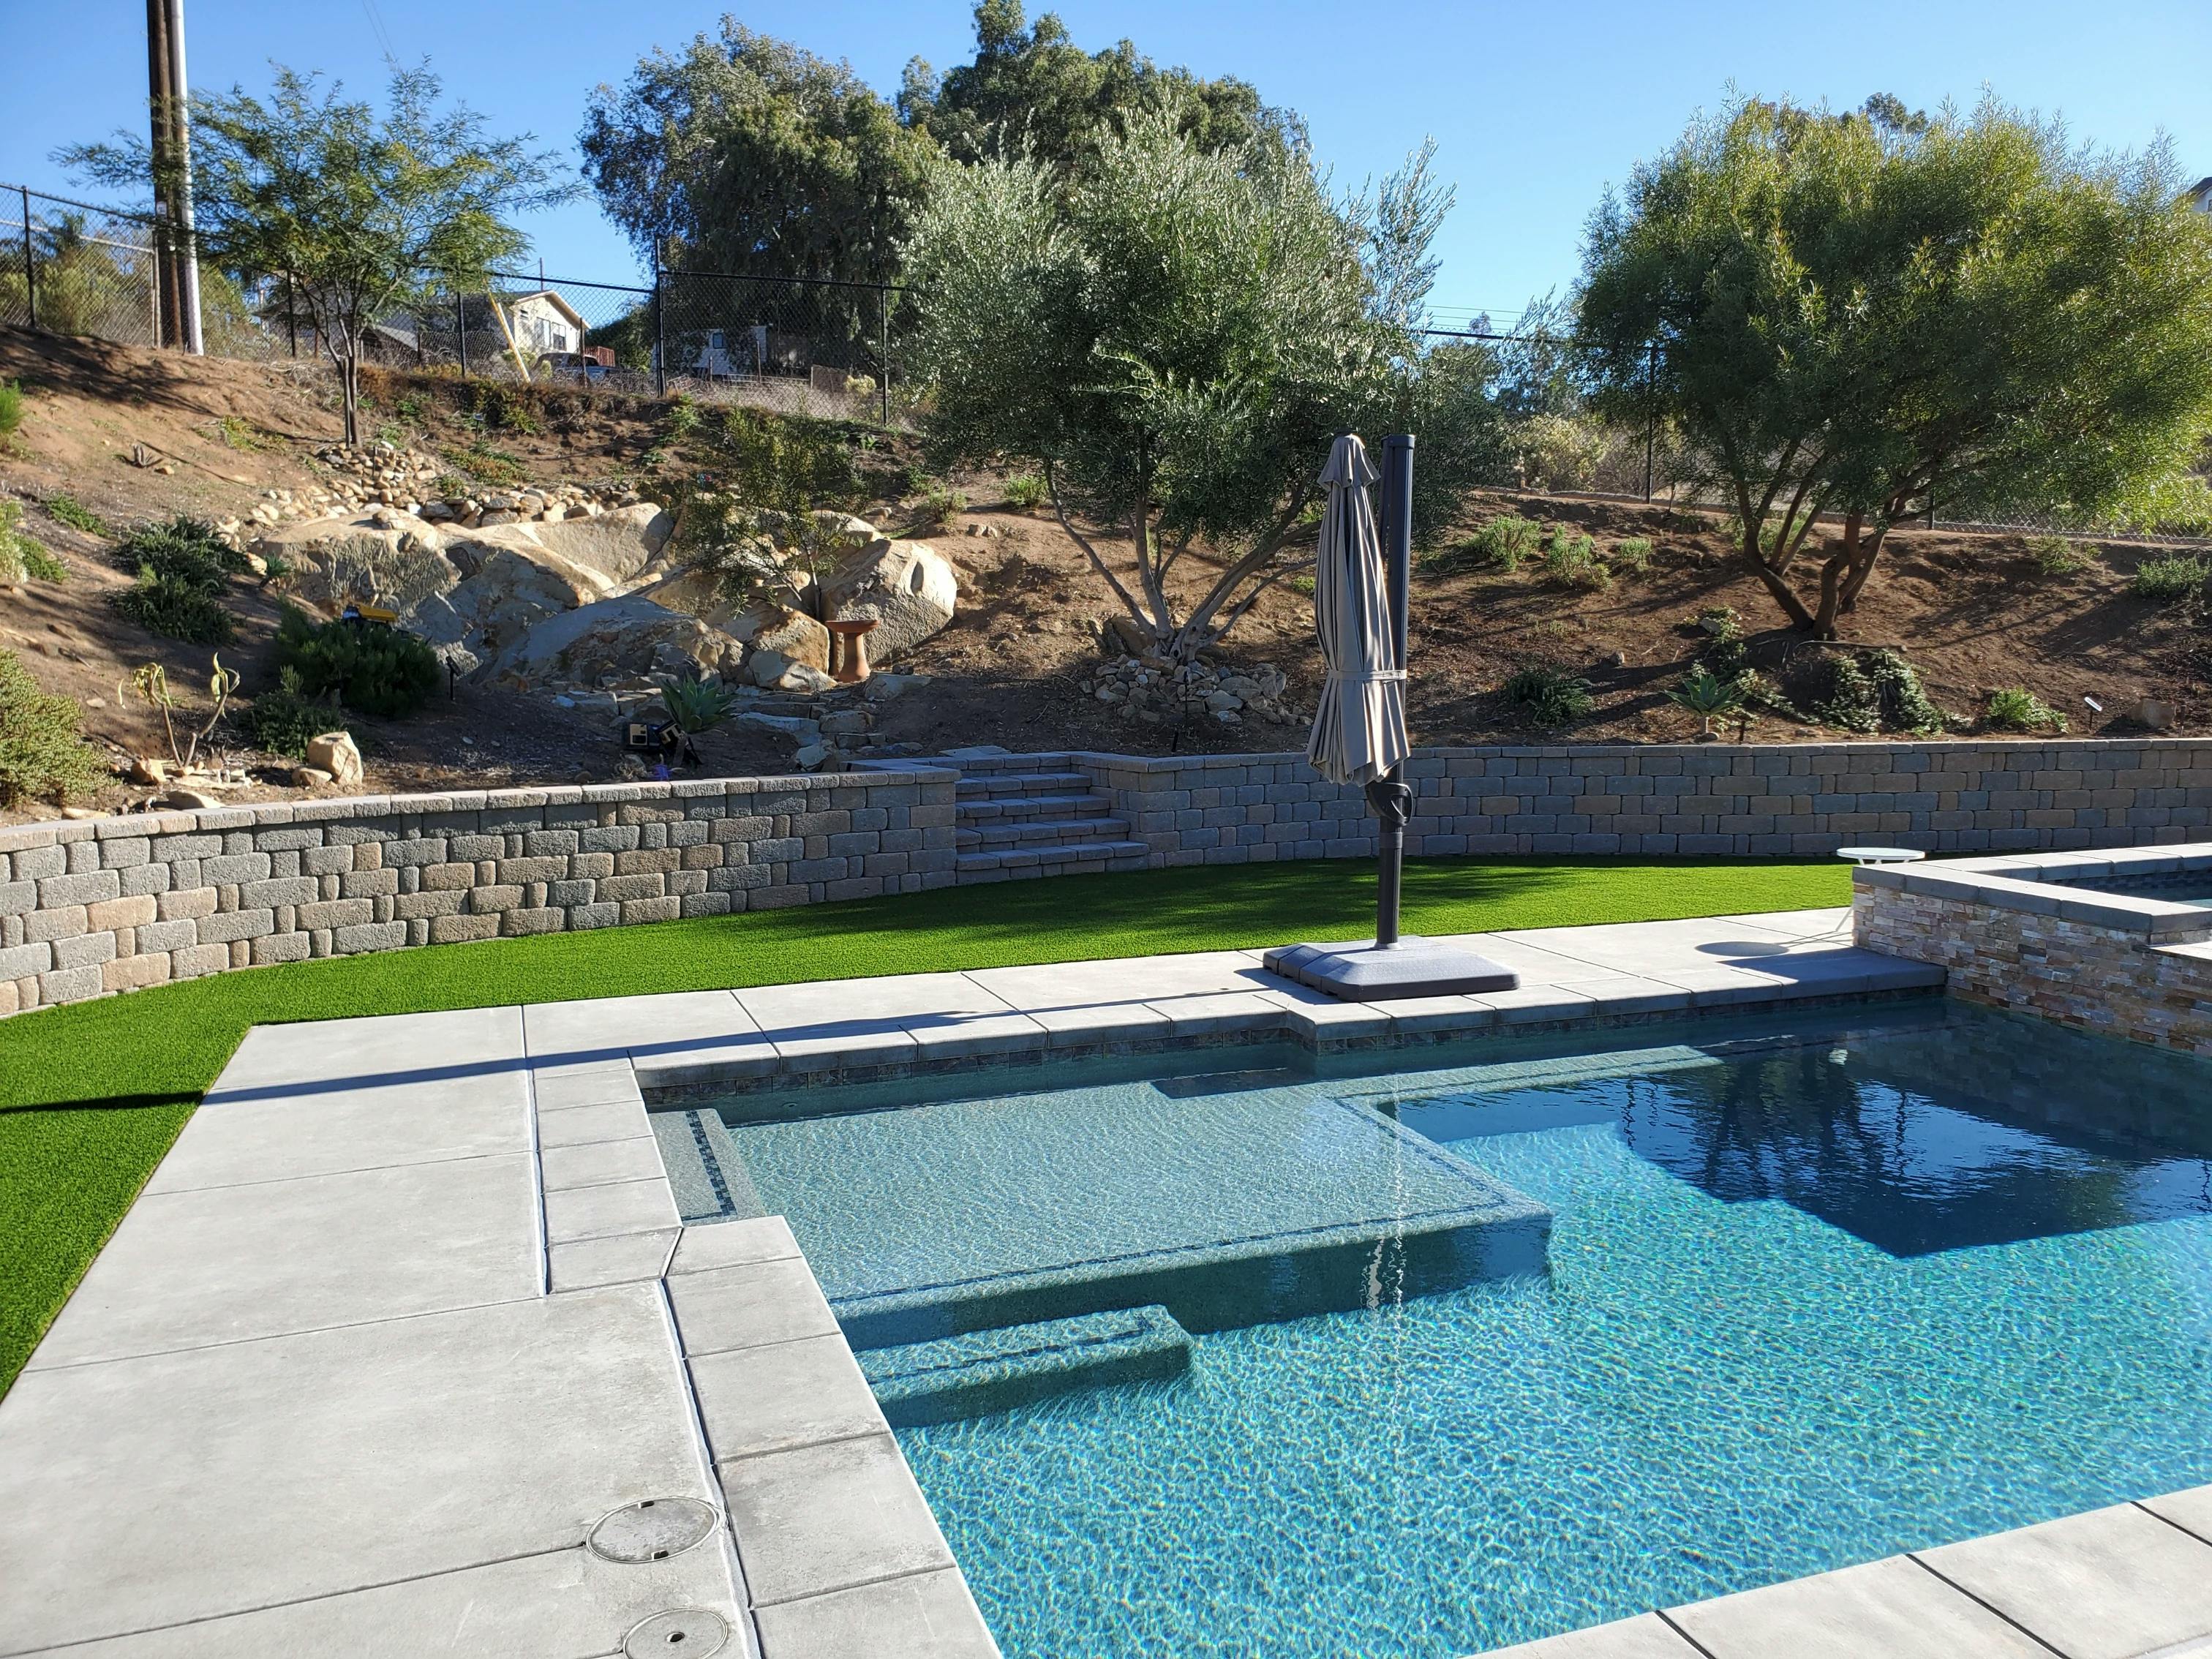 Photo of a backyard with artificial turf and a pool